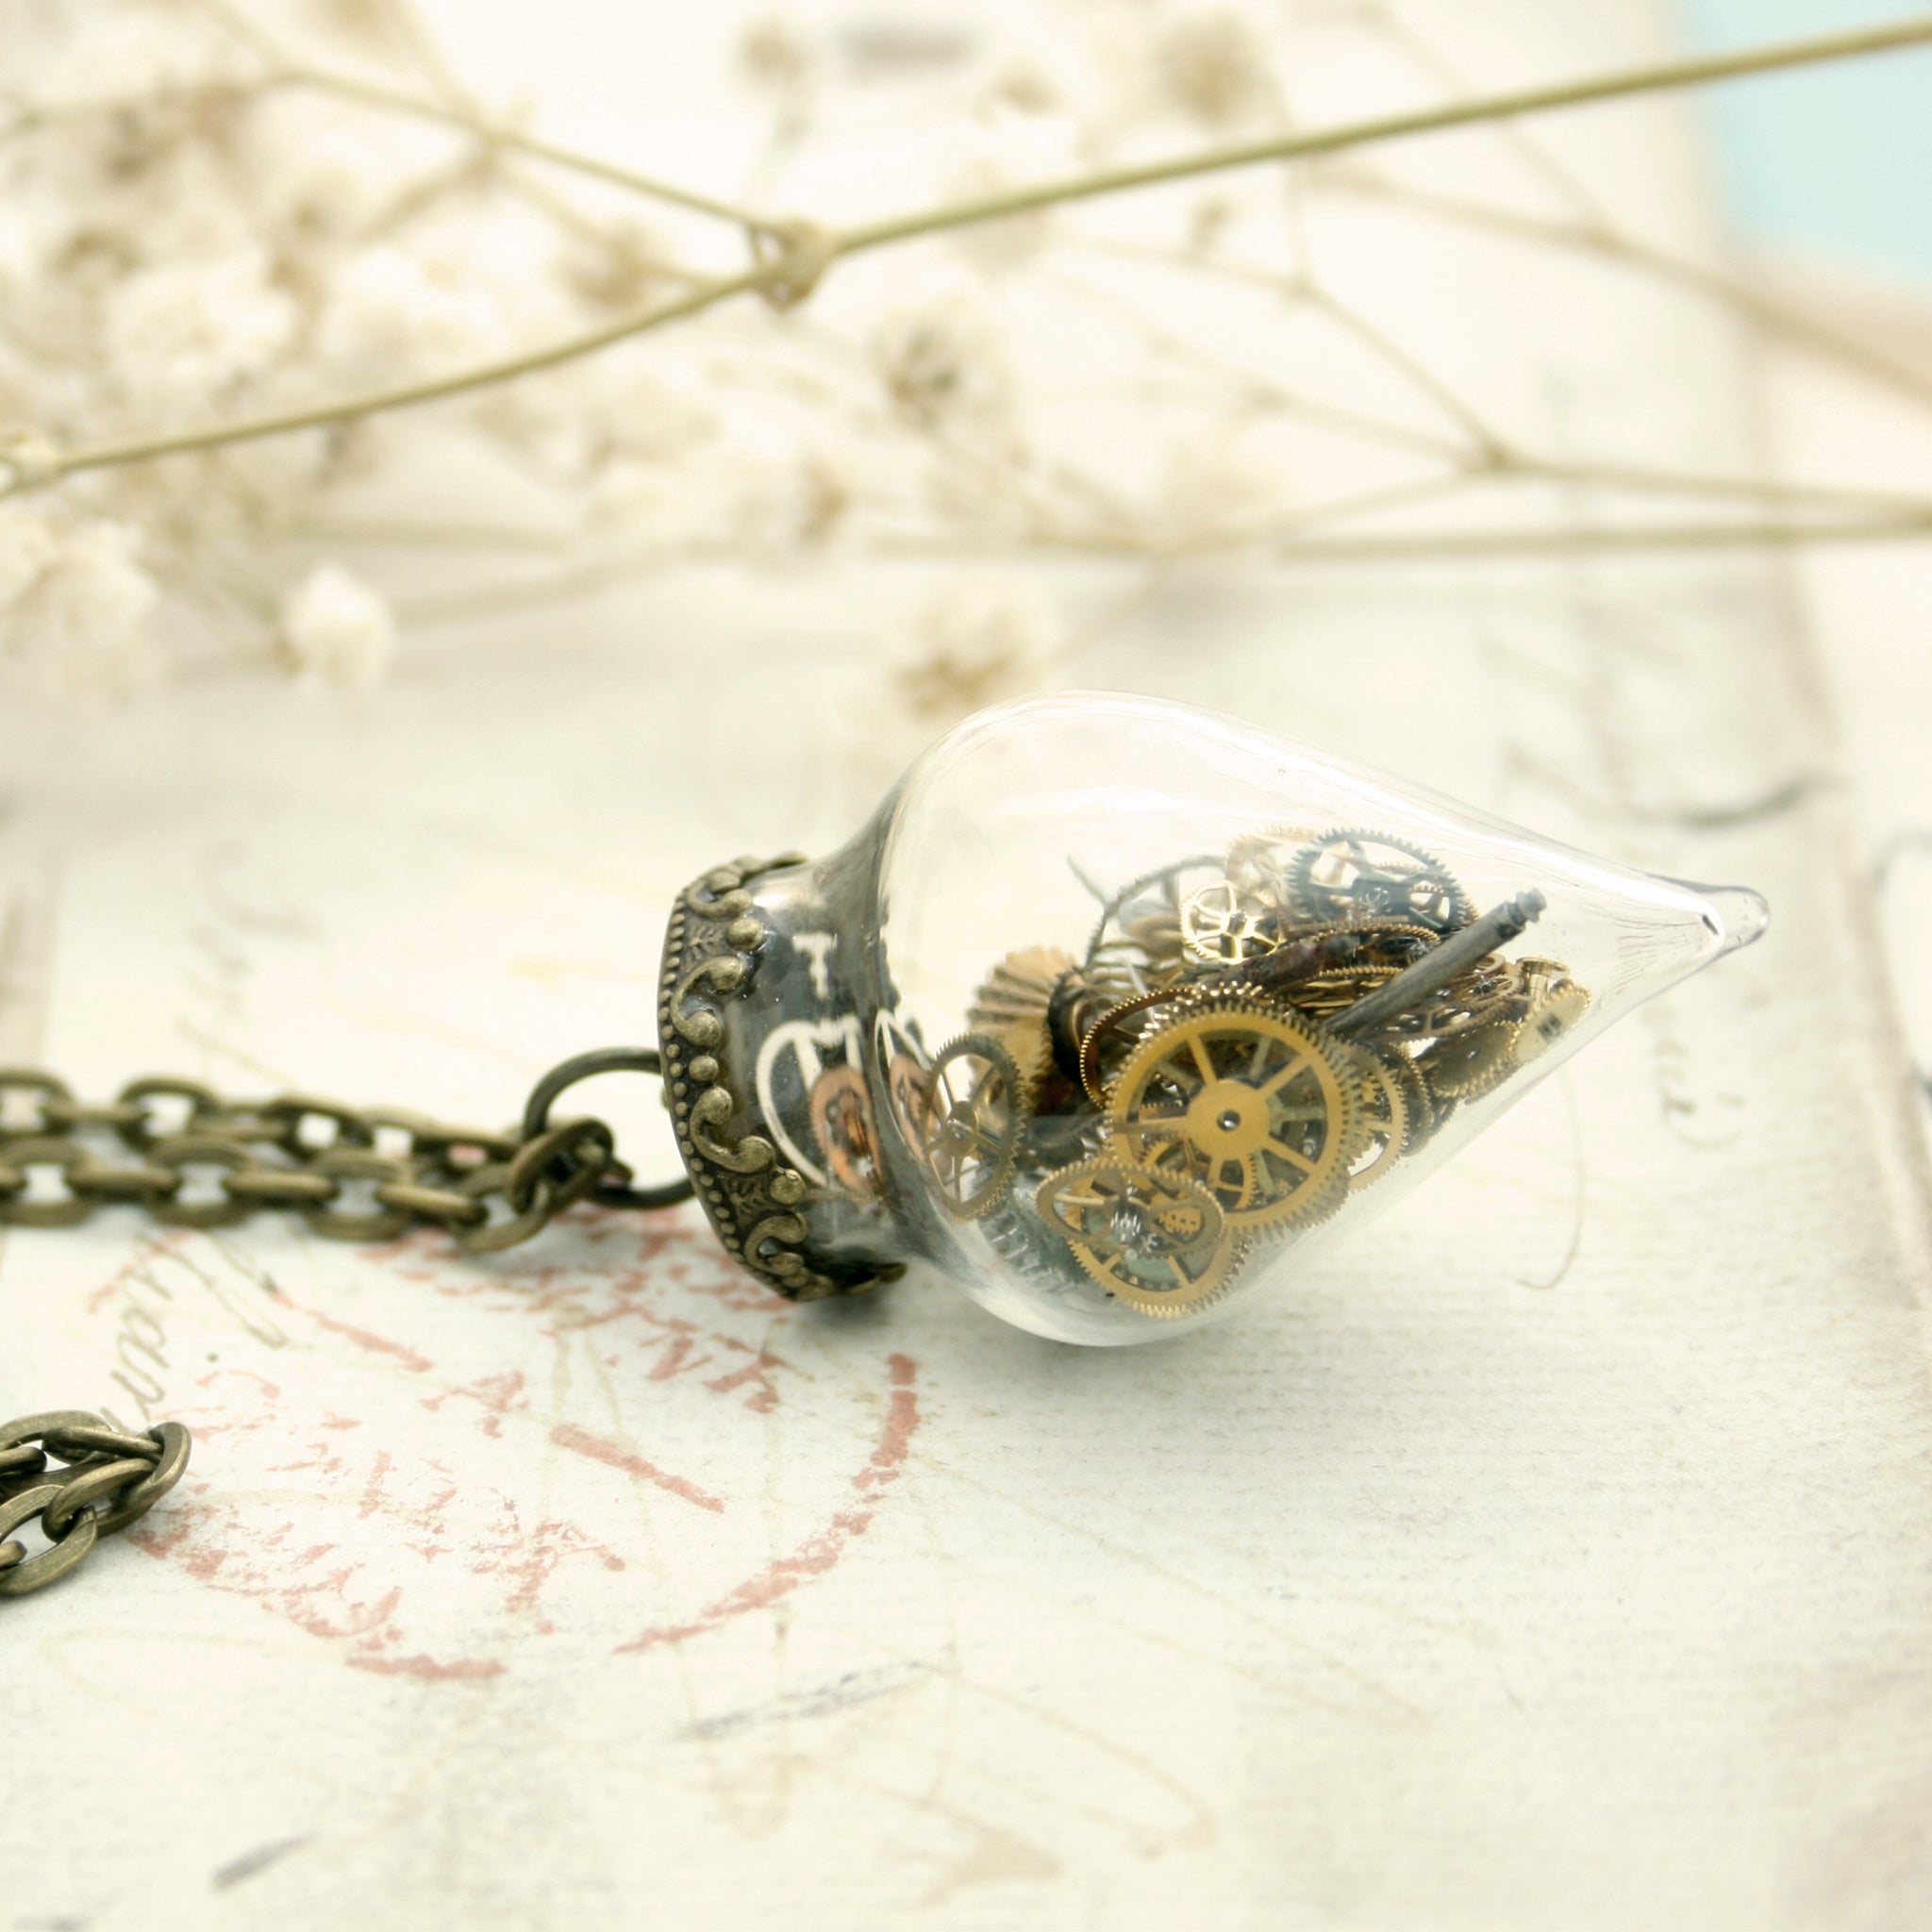 steampunk time capsule, terrarium pendant necklace made of glass in conical shape